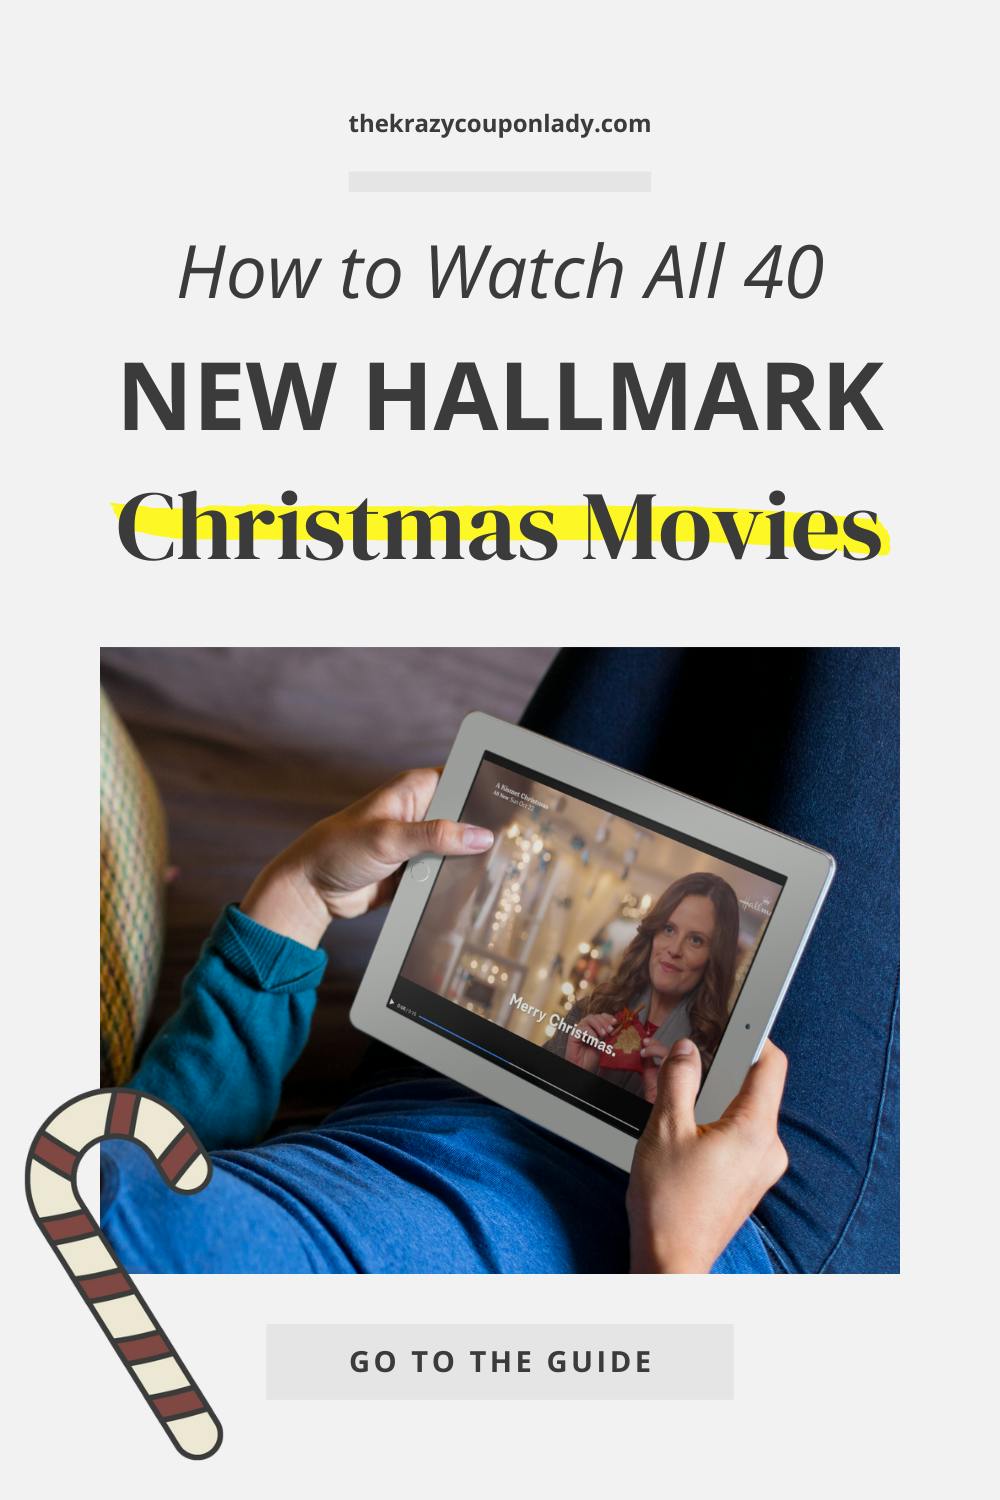 How to Watch All 40 New Hallmark Christmas Movies